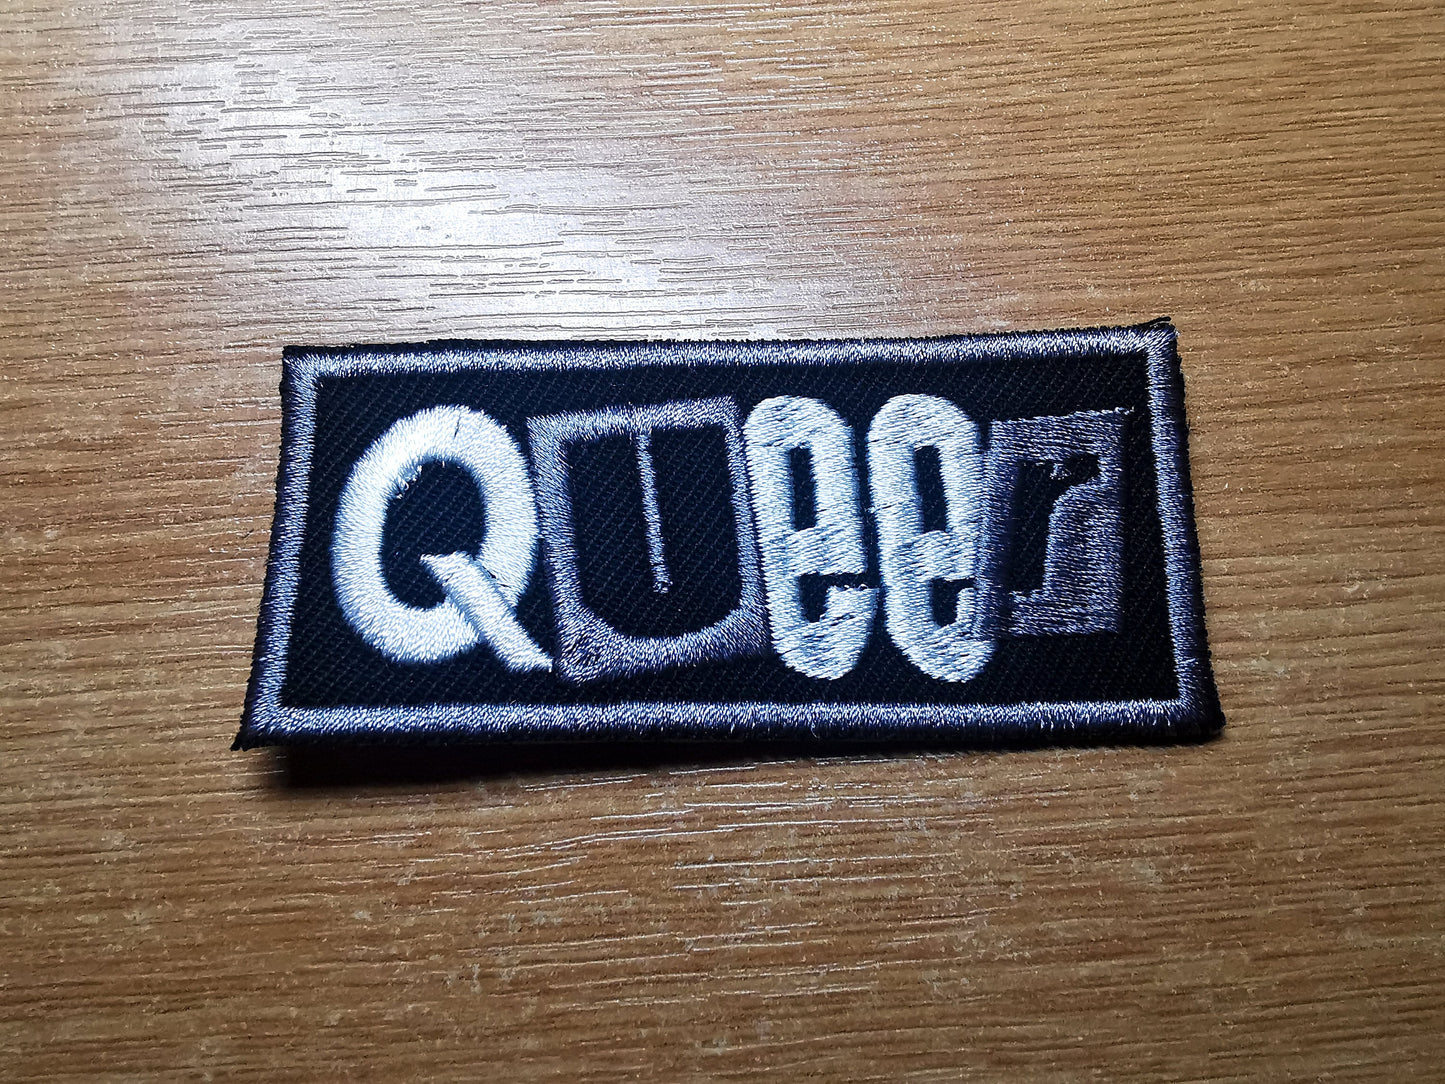 Queer Punk LGBTQ+ Iron On Grey Patch Pride Embroidered Patches